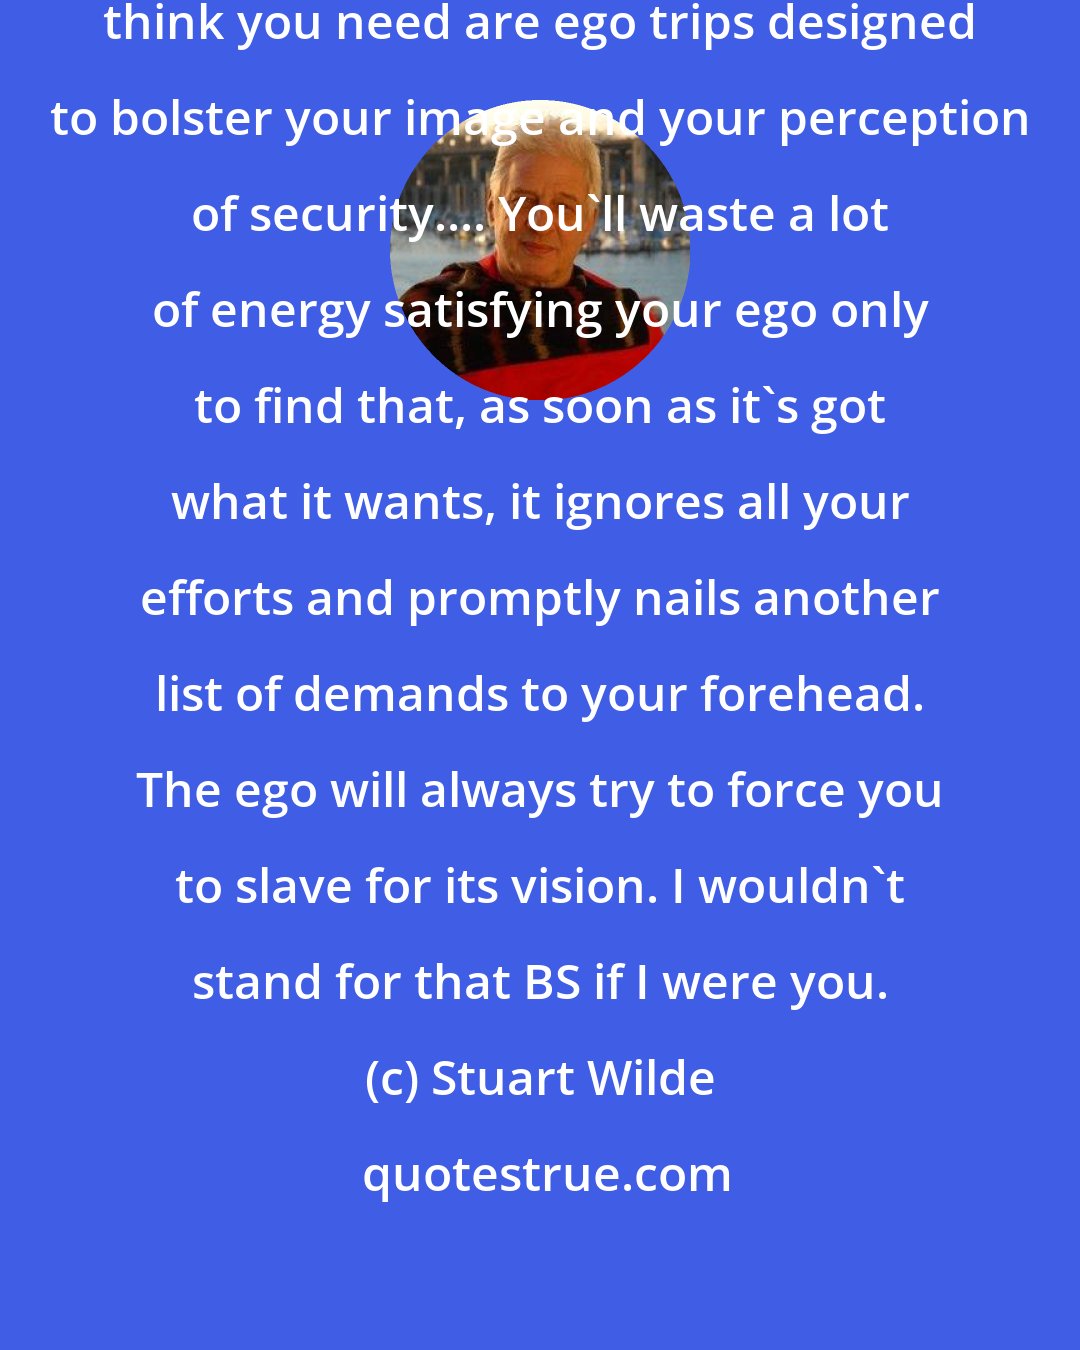 Stuart Wilde: Remember, most of the things you think you need are ego trips designed to bolster your image and your perception of security.... You'll waste a lot of energy satisfying your ego only to find that, as soon as it's got what it wants, it ignores all your efforts and promptly nails another list of demands to your forehead. The ego will always try to force you to slave for its vision. I wouldn't stand for that BS if I were you.